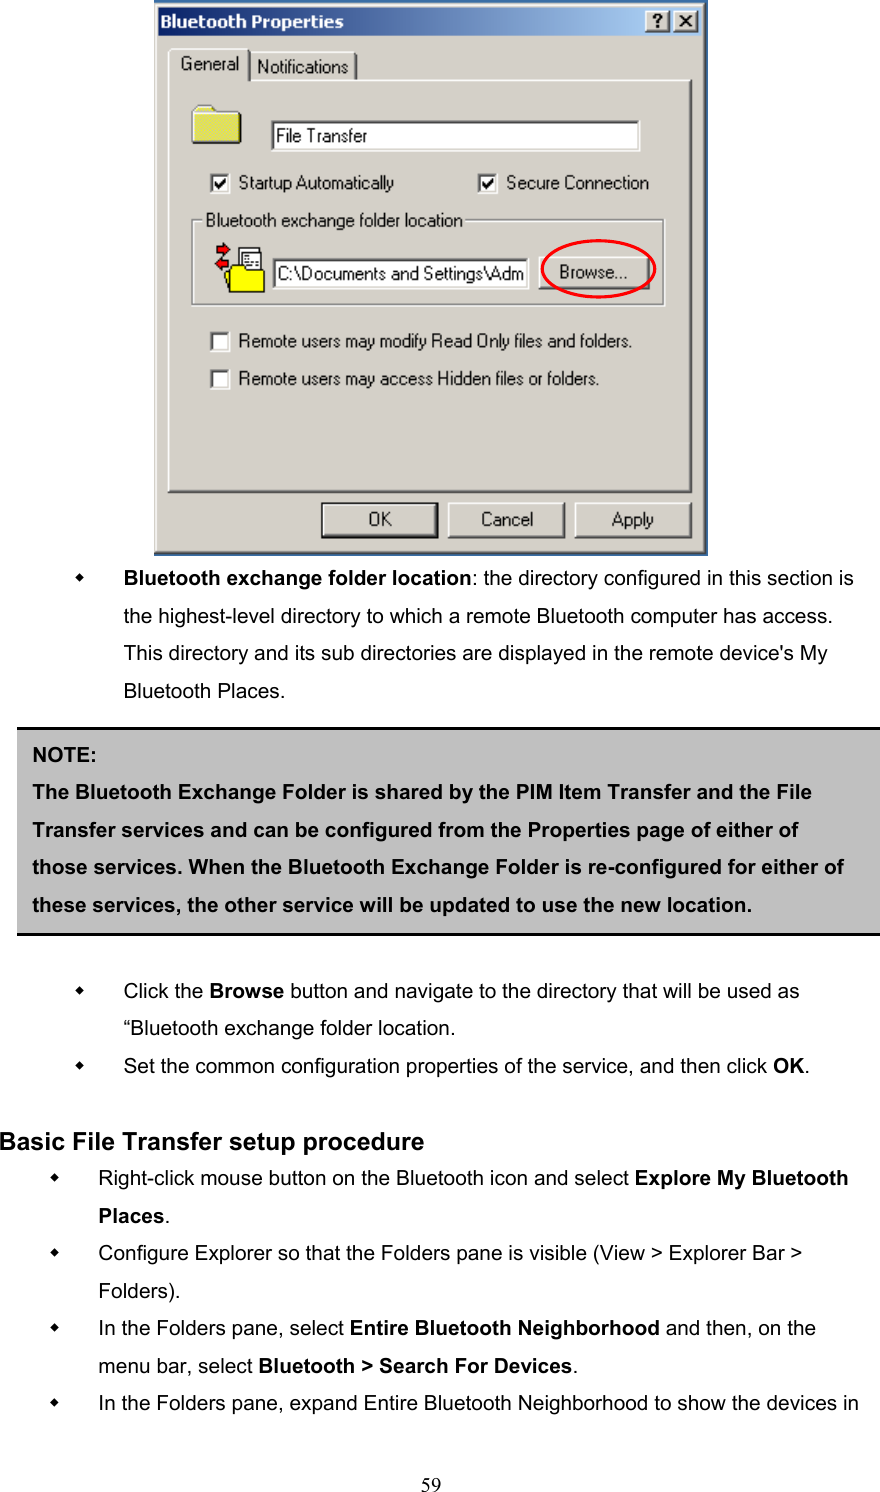  59    Bluetooth exchange folder location: the directory configured in this section is the highest-level directory to which a remote Bluetooth computer has access. This directory and its sub directories are displayed in the remote device&apos;s My Bluetooth Places.          Click the Browse button and navigate to the directory that will be used as “Bluetooth exchange folder location.   Set the common configuration properties of the service, and then click OK.  Basic File Transfer setup procedure   Right-click mouse button on the Bluetooth icon and select Explore My Bluetooth Places.   Configure Explorer so that the Folders pane is visible (View &gt; Explorer Bar &gt; Folders).   In the Folders pane, select Entire Bluetooth Neighborhood and then, on the menu bar, select Bluetooth &gt; Search For Devices.   In the Folders pane, expand Entire Bluetooth Neighborhood to show the devices in NOTE:  The Bluetooth Exchange Folder is shared by the PIM Item Transfer and the File Transfer services and can be configured from the Properties page of either of those services. When the Bluetooth Exchange Folder is re-configured for either of these services, the other service will be updated to use the new location. 